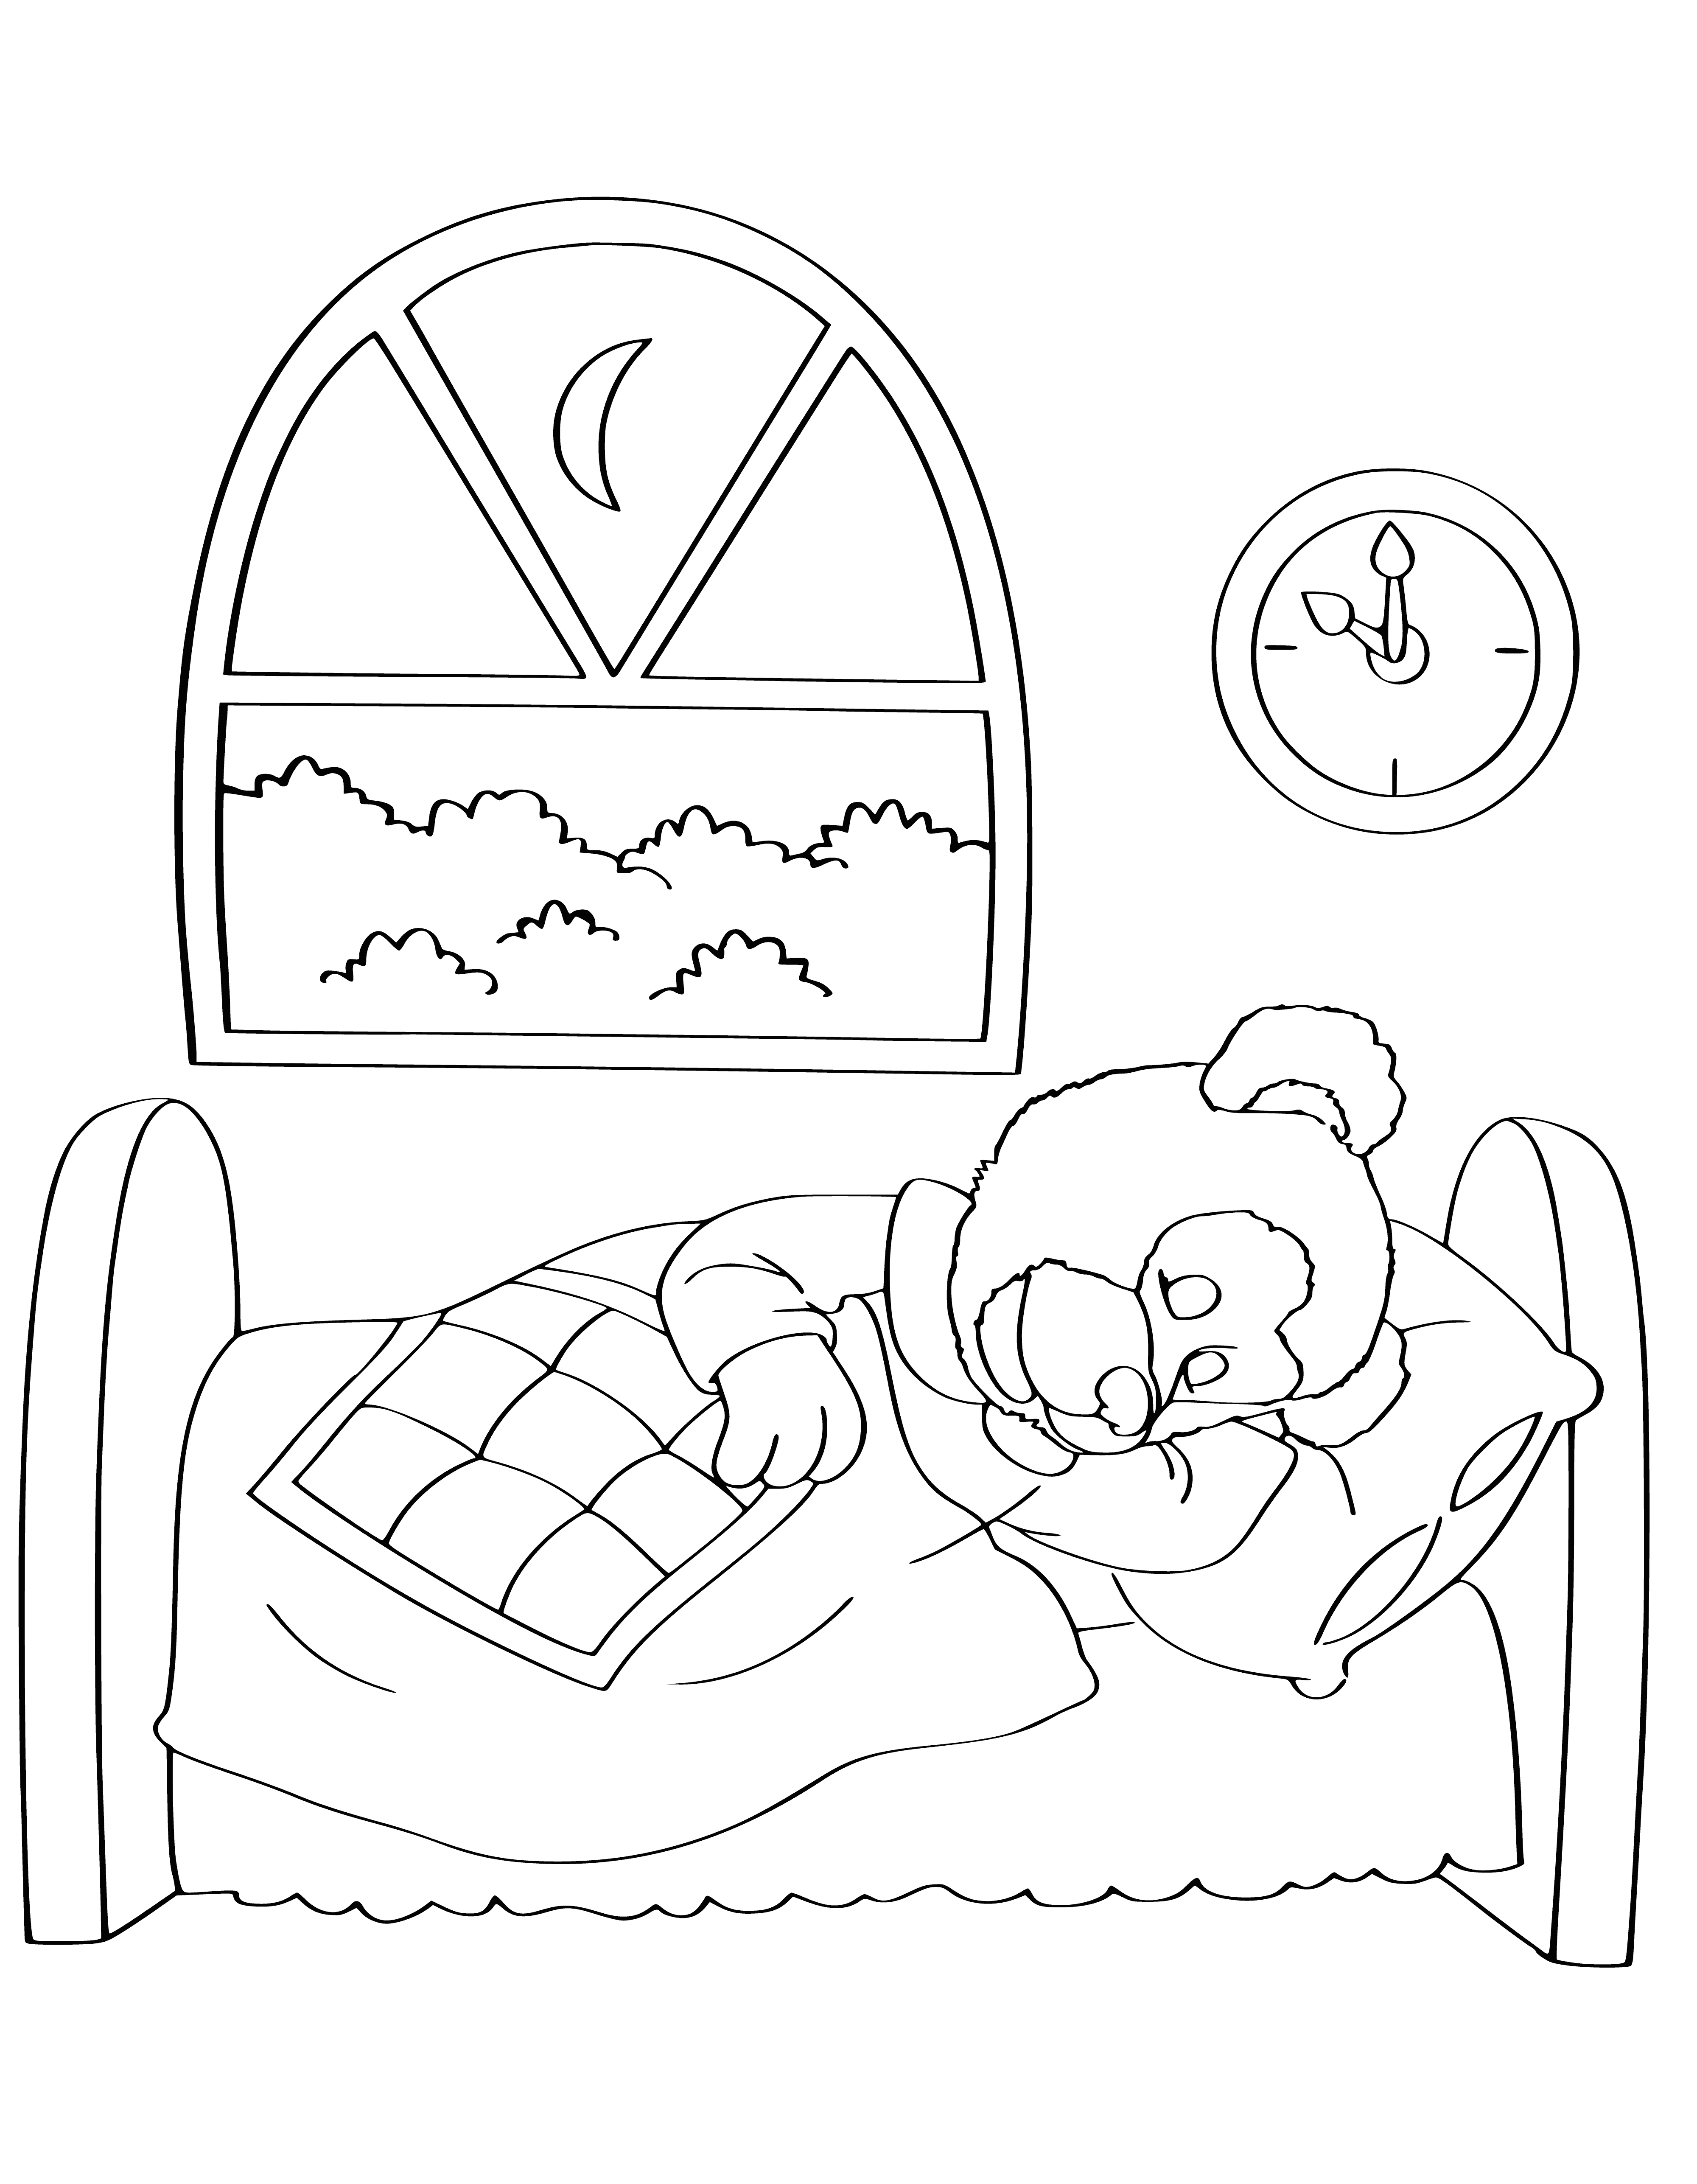 Mishutka coloring page